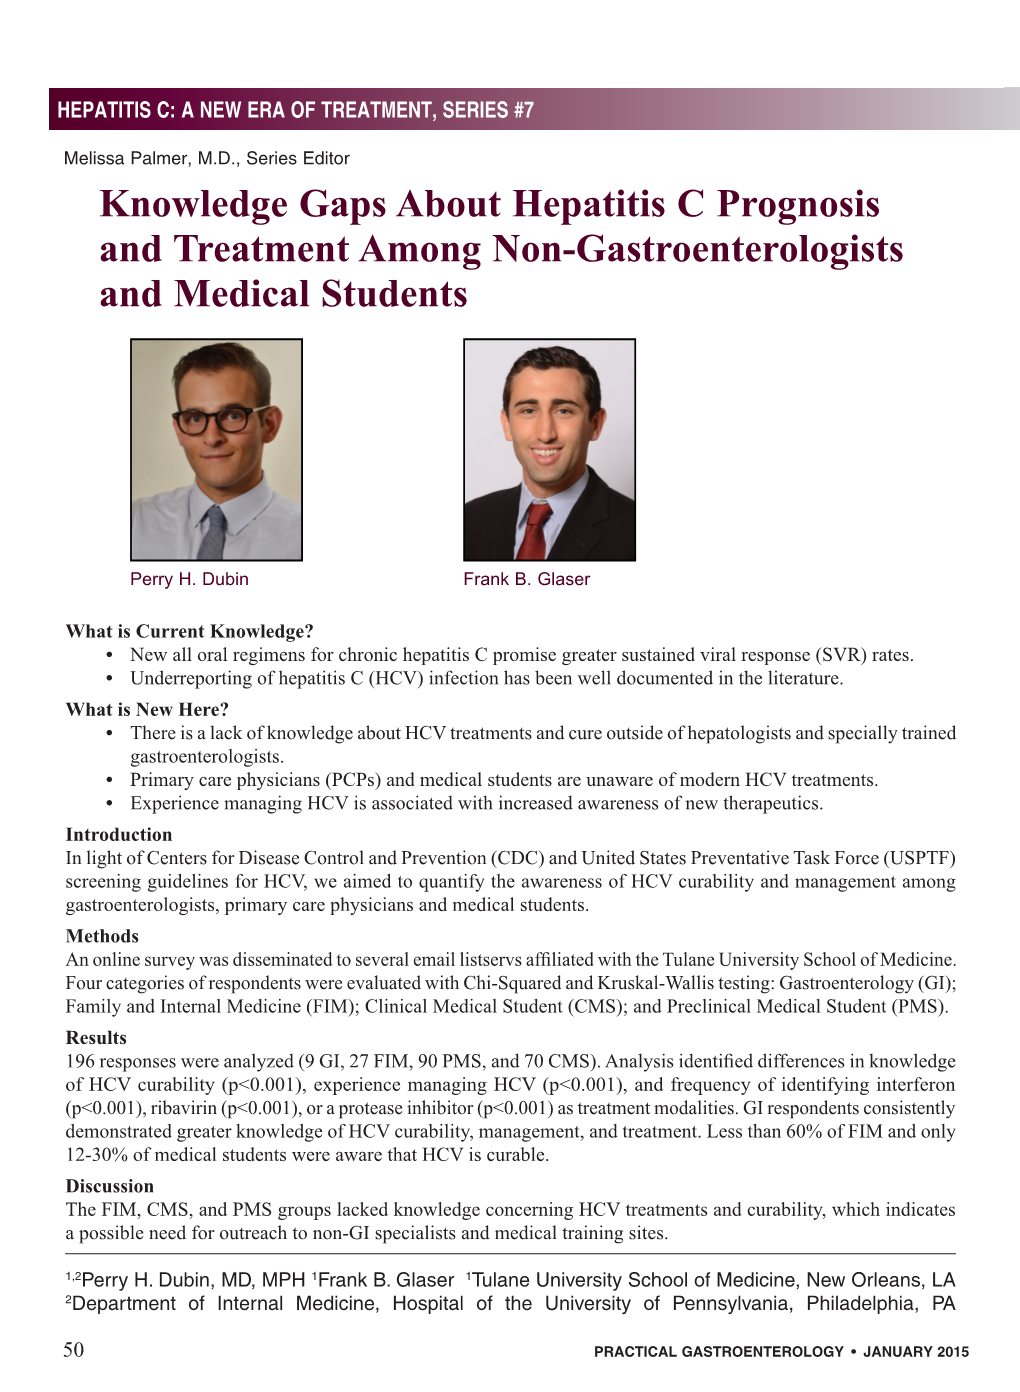 Knowledge Gaps About Hepatitis C Prognosis and Treatment Among Non-Gastroenterologists and Medical Students